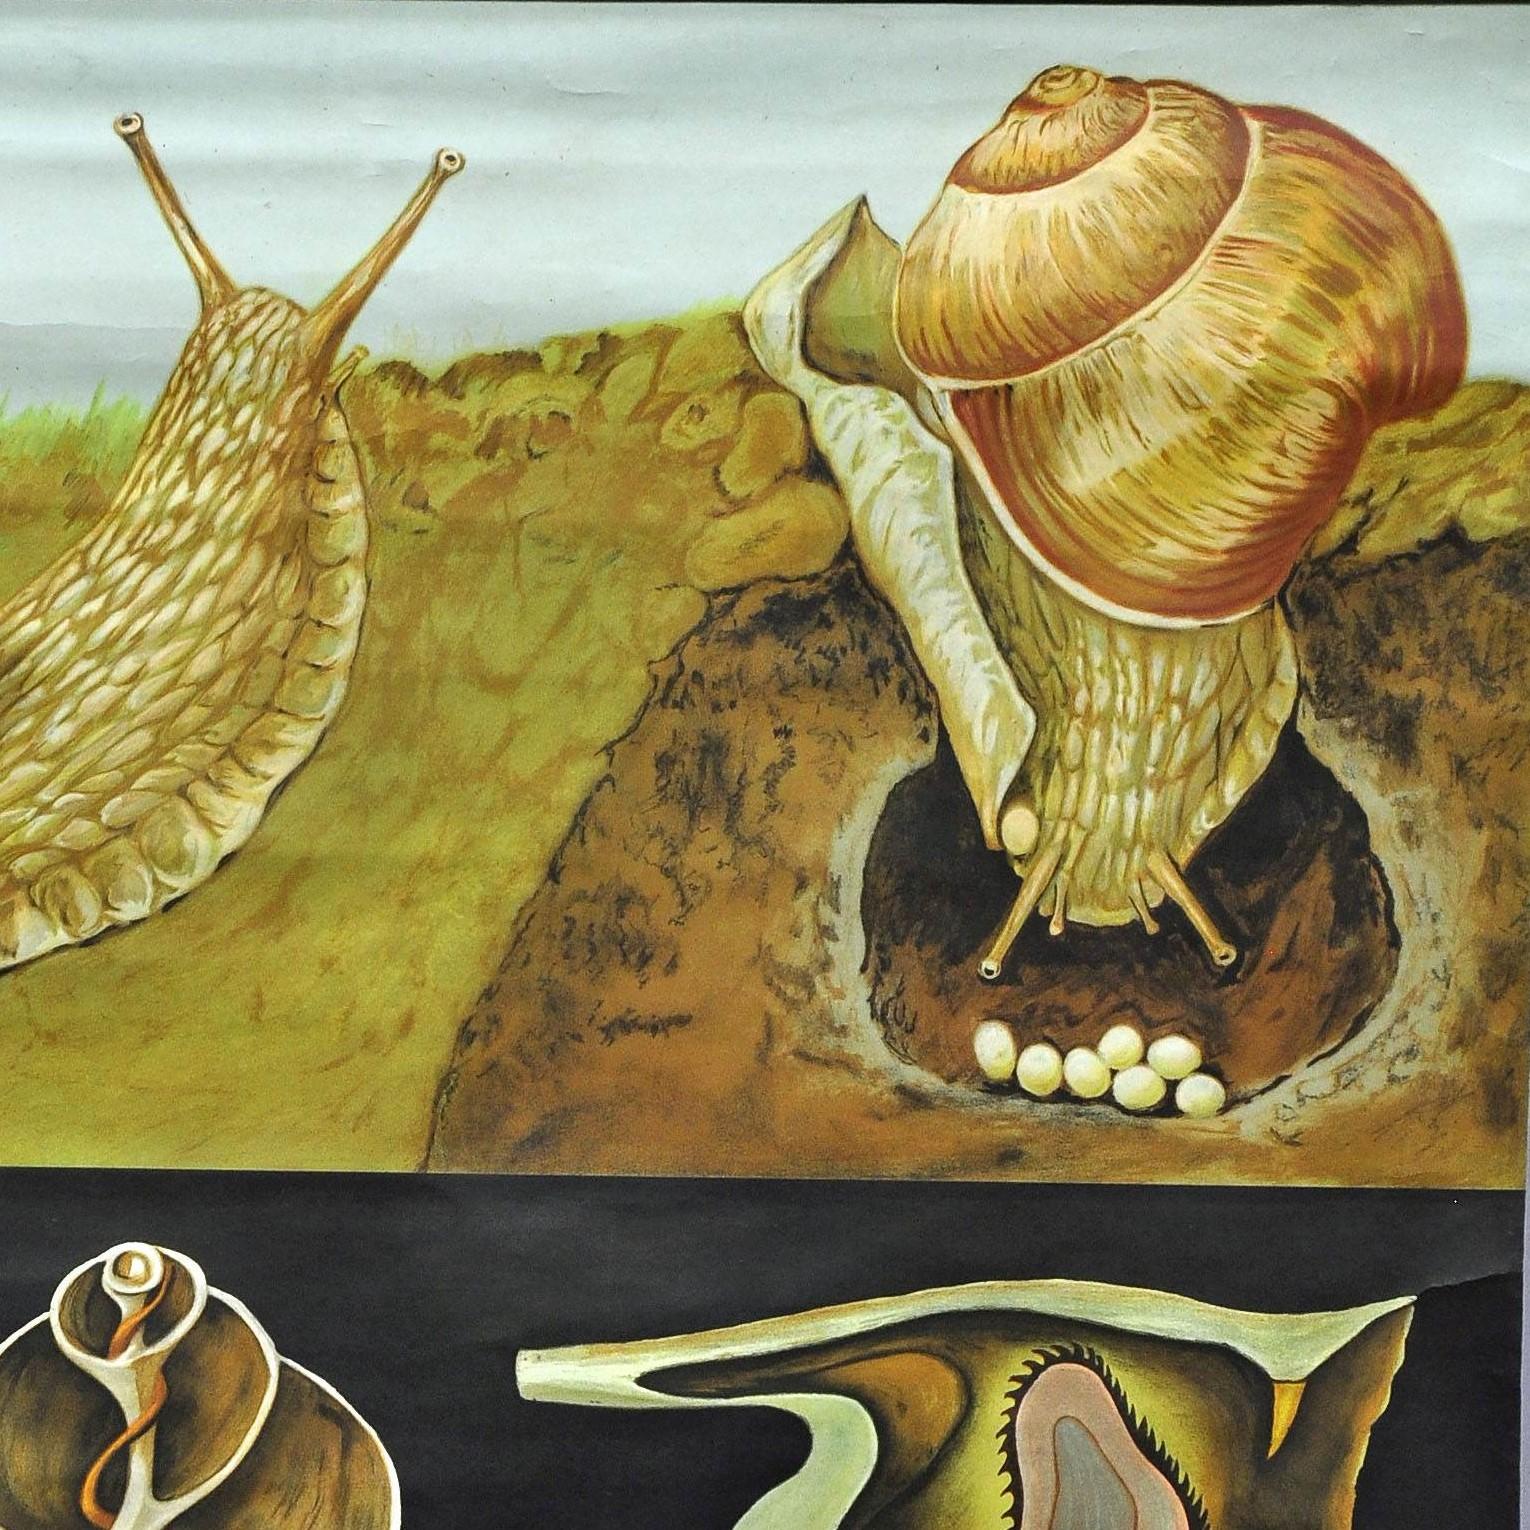 A classical Jung Koch Quentell close up depicting an apple snail (escargot) and its anatomy. Used as teaching material in German schools. Colorful print on paper reinforced with canvas. Published by Hagemann, Duesseldorf.
Measurements:
Width 82cm